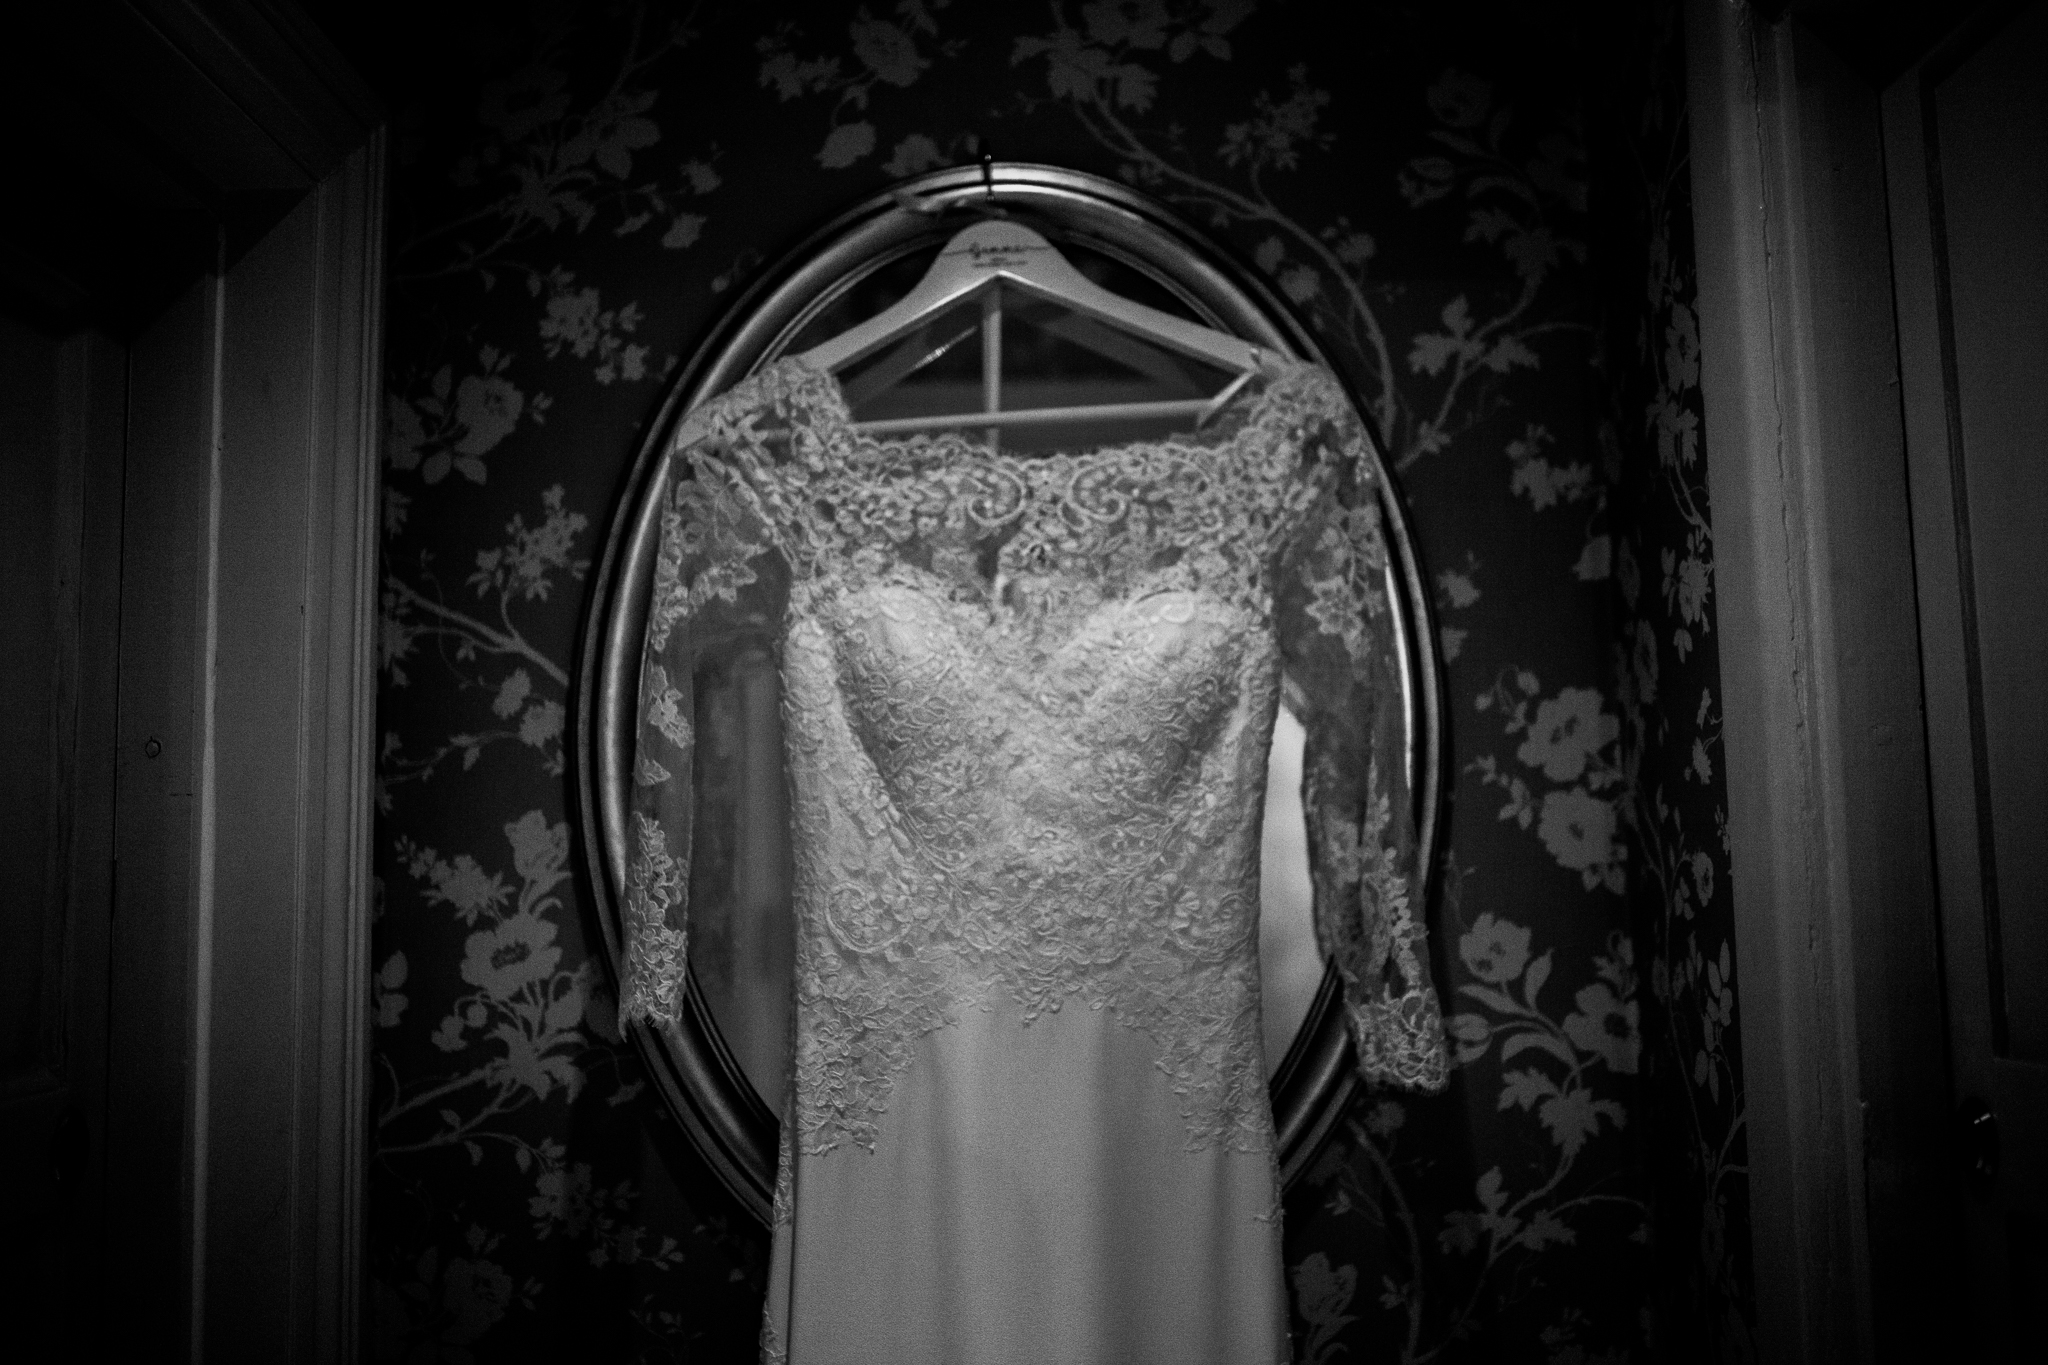 Mirror in hallway with wedding dress hanging on it